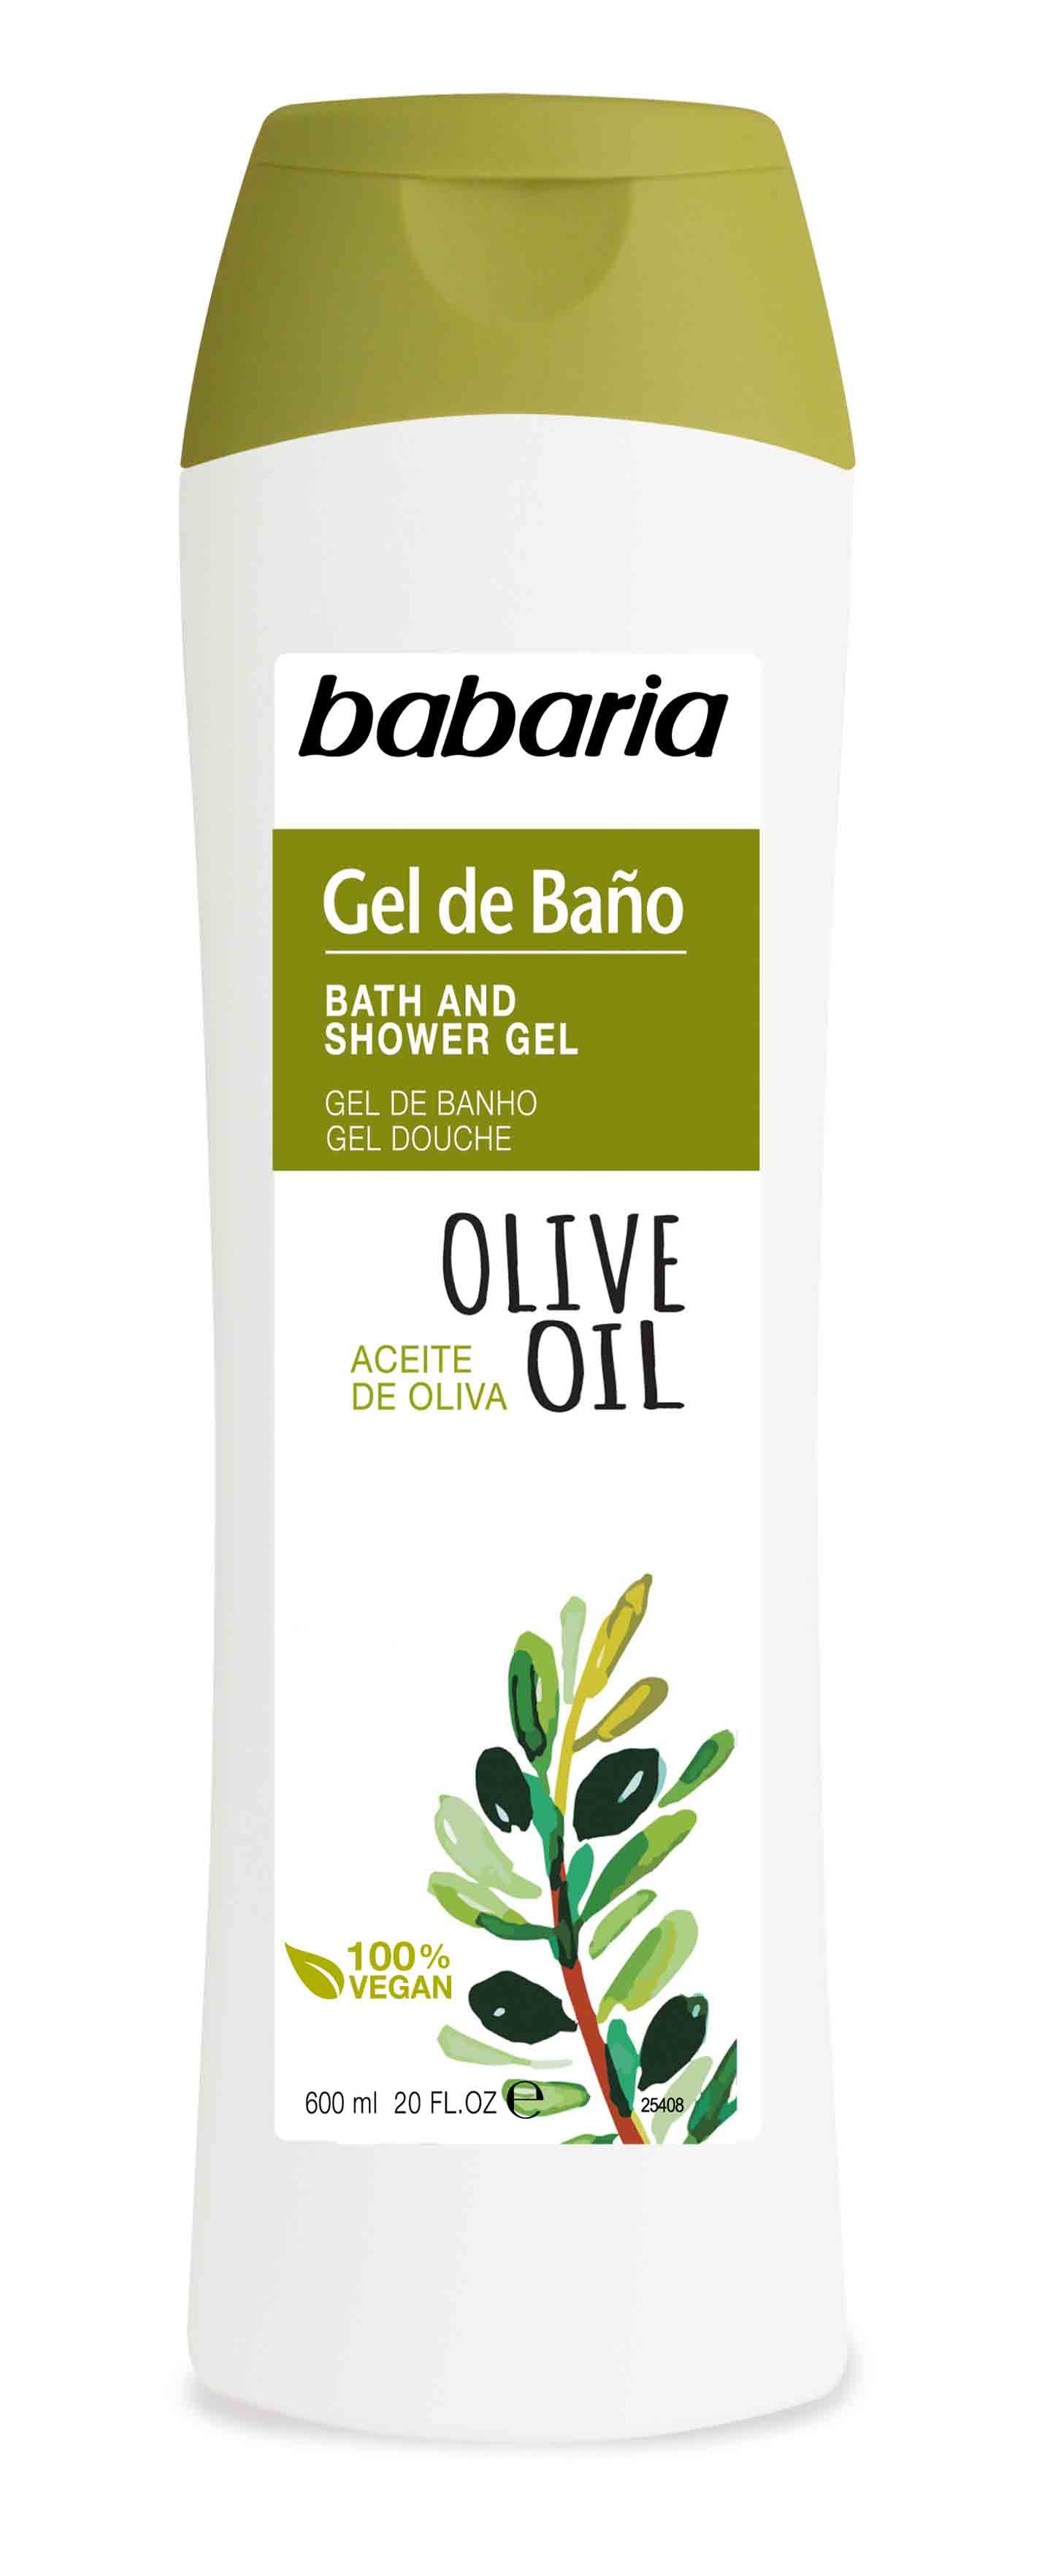 Babaria Bath and Shower Gel Olive Oil